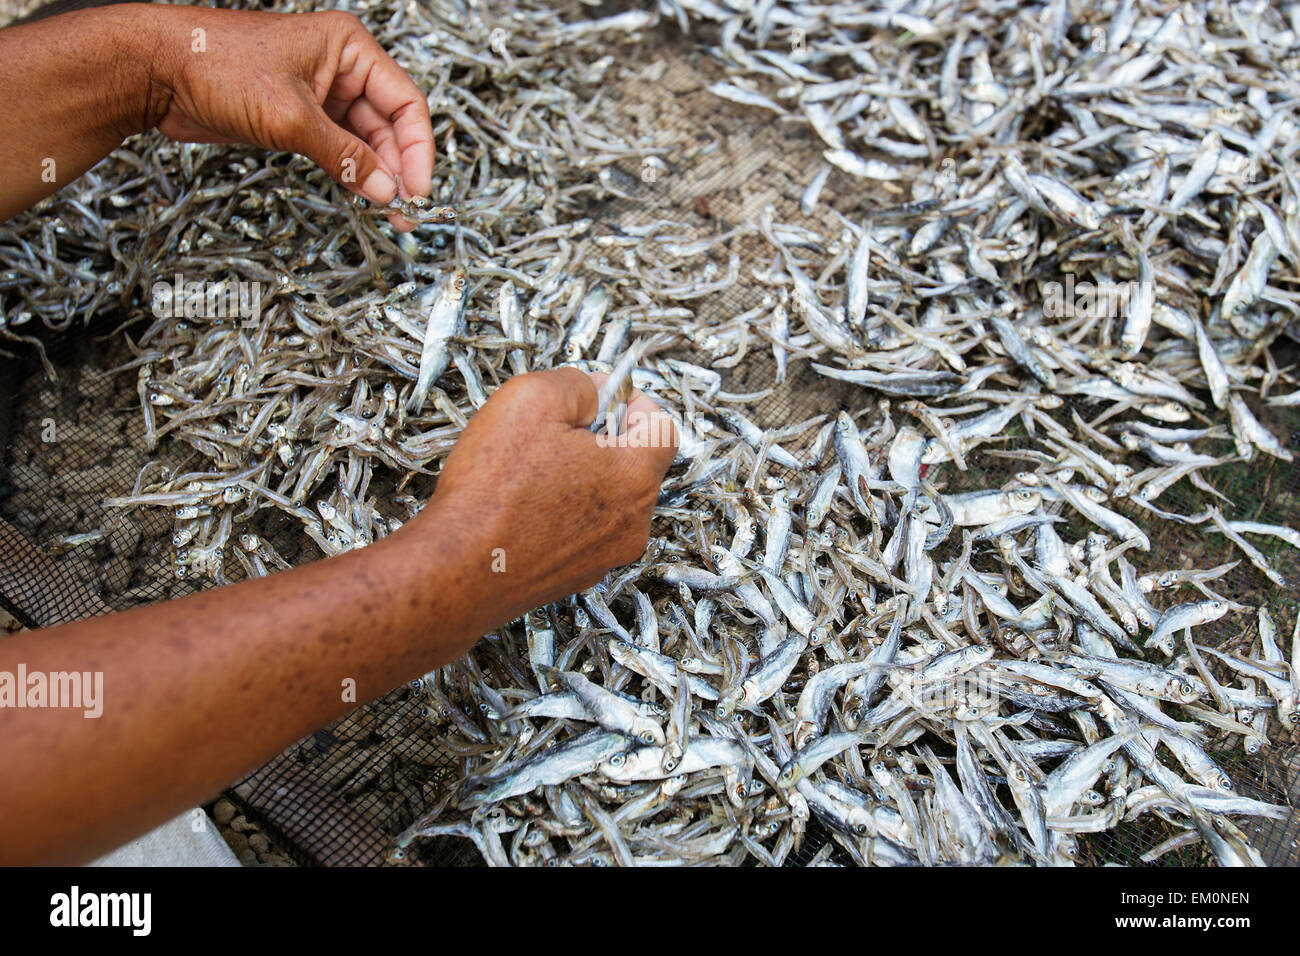 A woman sorts the fish catch in Lhok Seudu village; Aceh Province, Sumatra, Indonesia Stock Photo